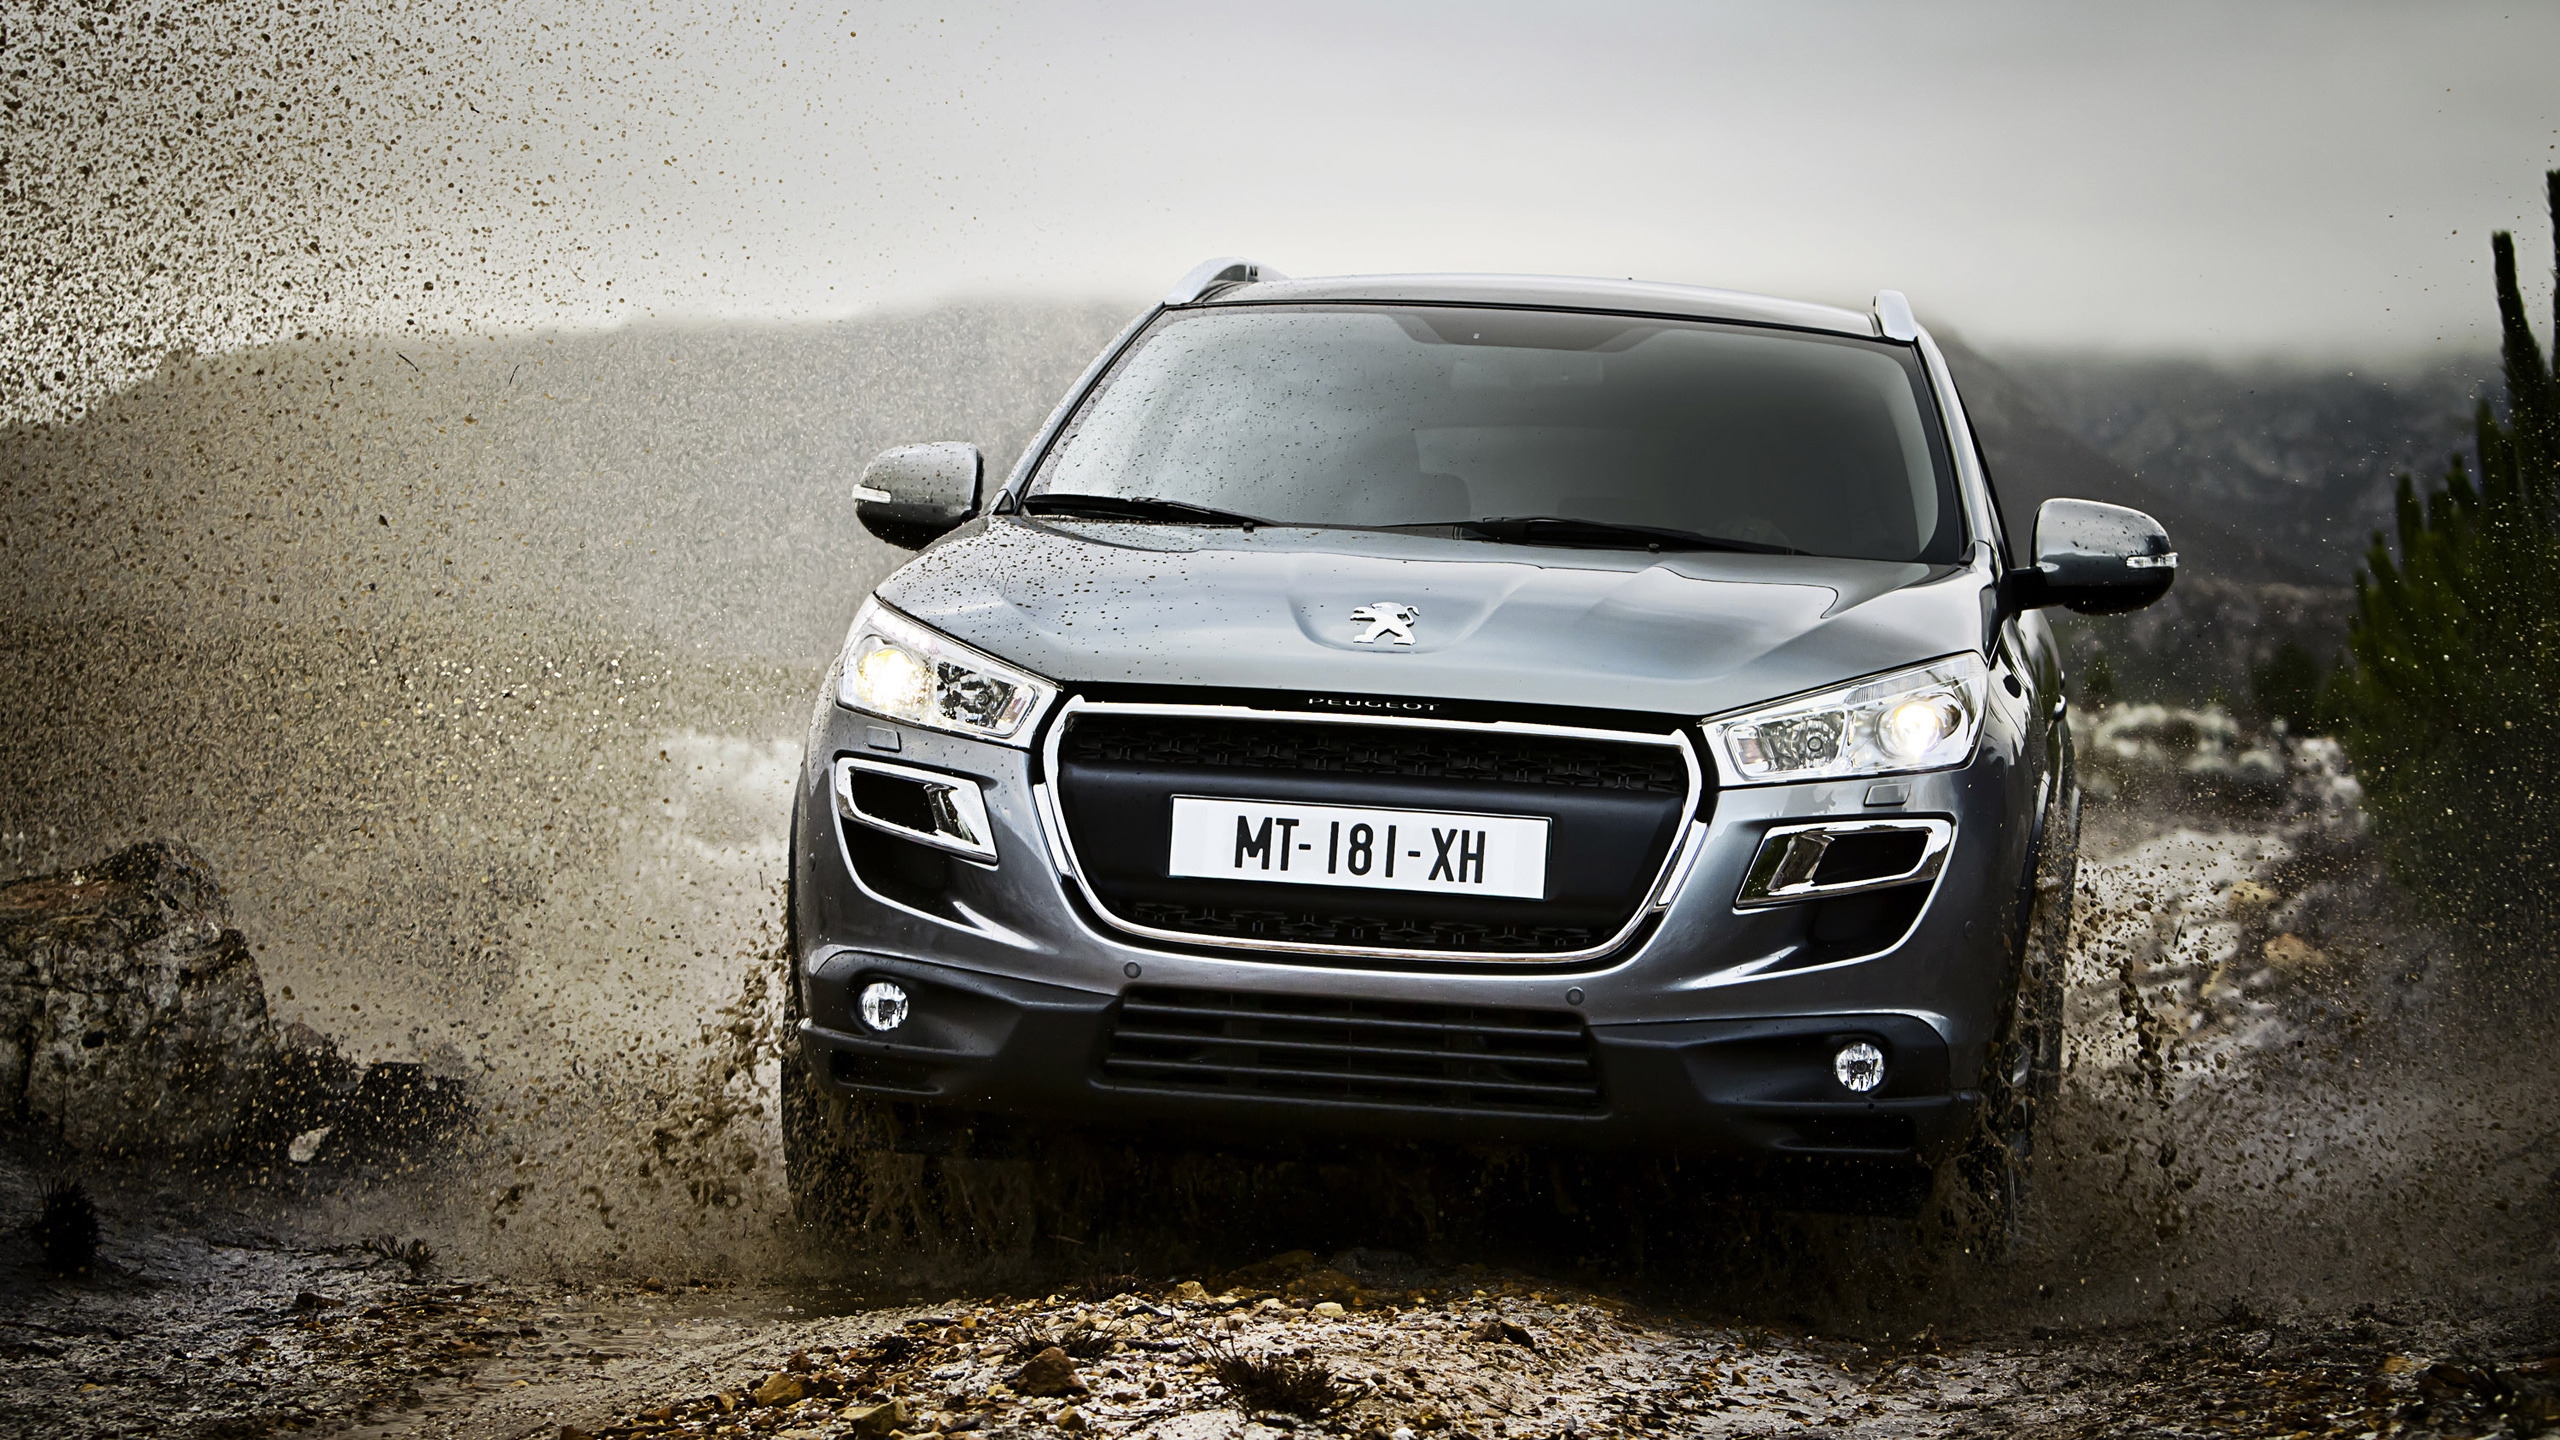 Angry Peugeot 4008 for 2560x1440 HDTV resolution